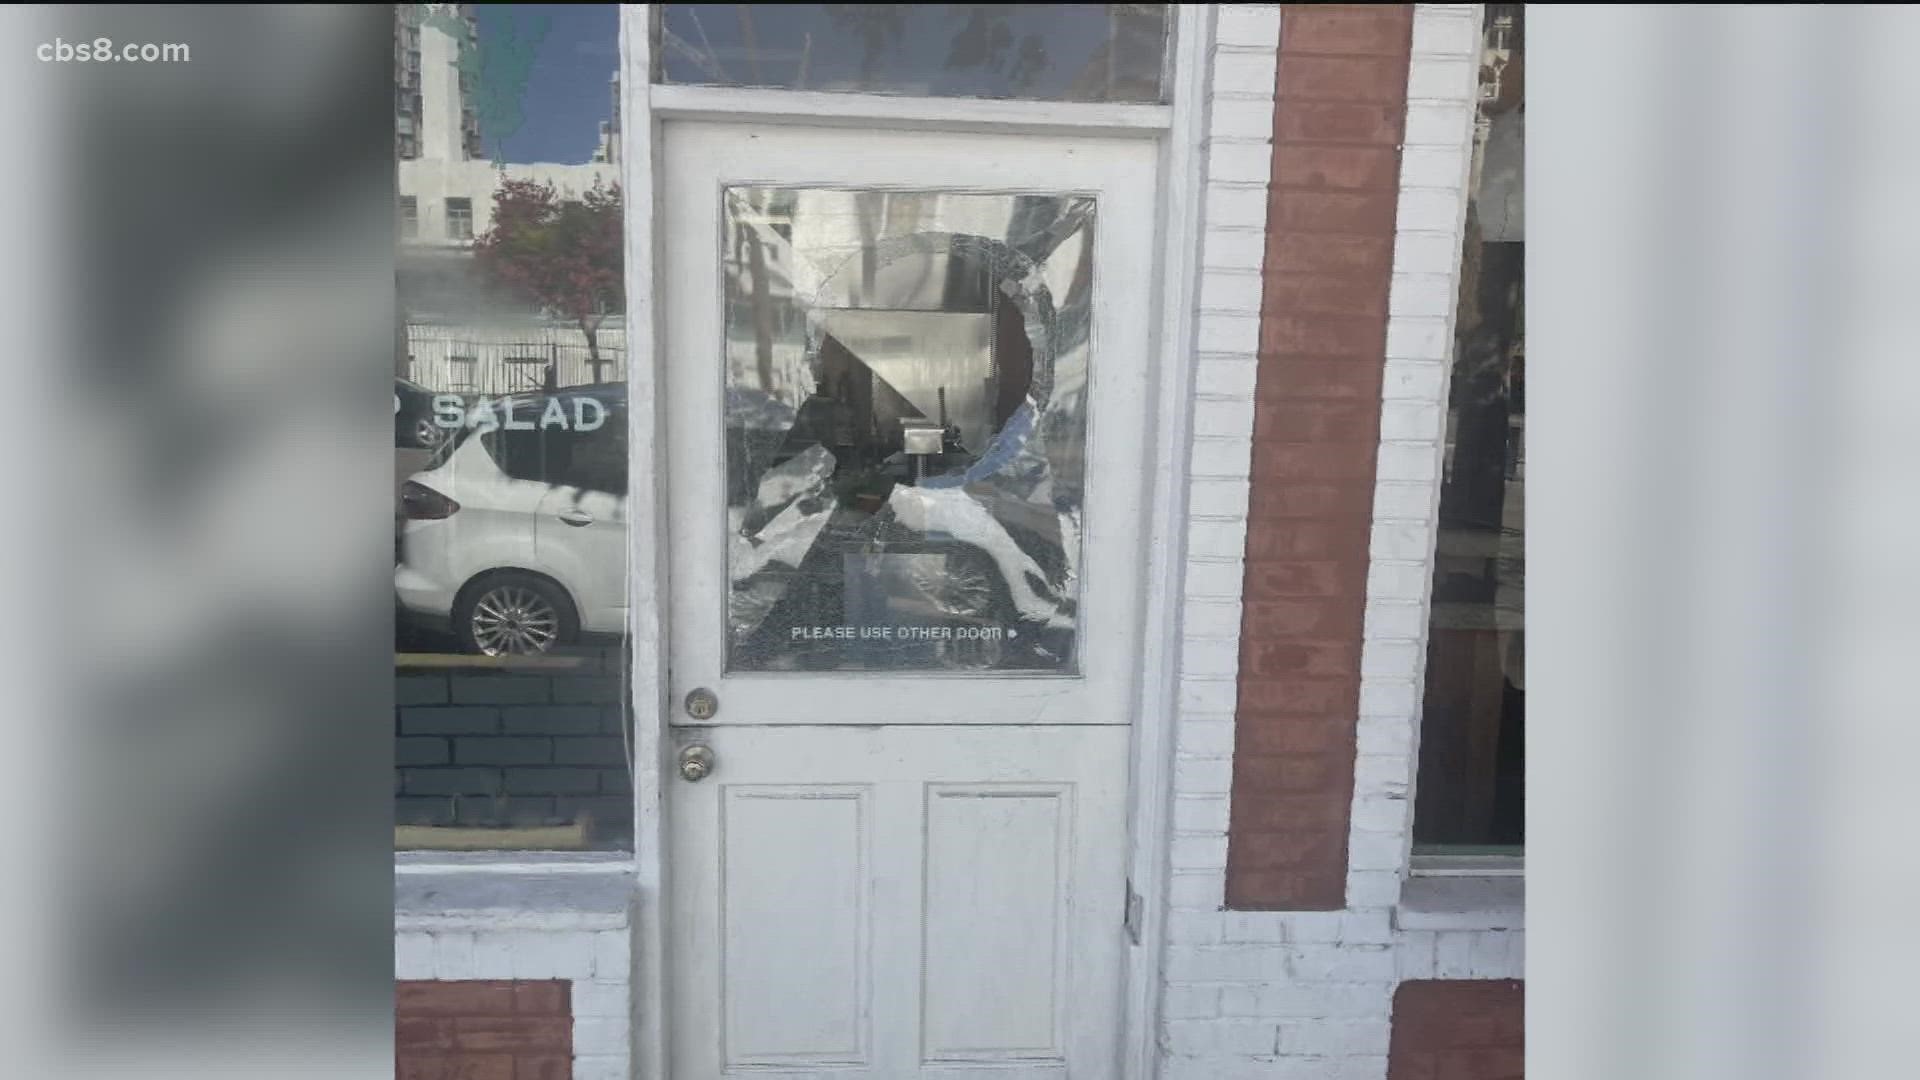 Avonte Hartsfield's new restaurant location was set to open in November but now a window was smashed and the building was vandalized by graffiti.